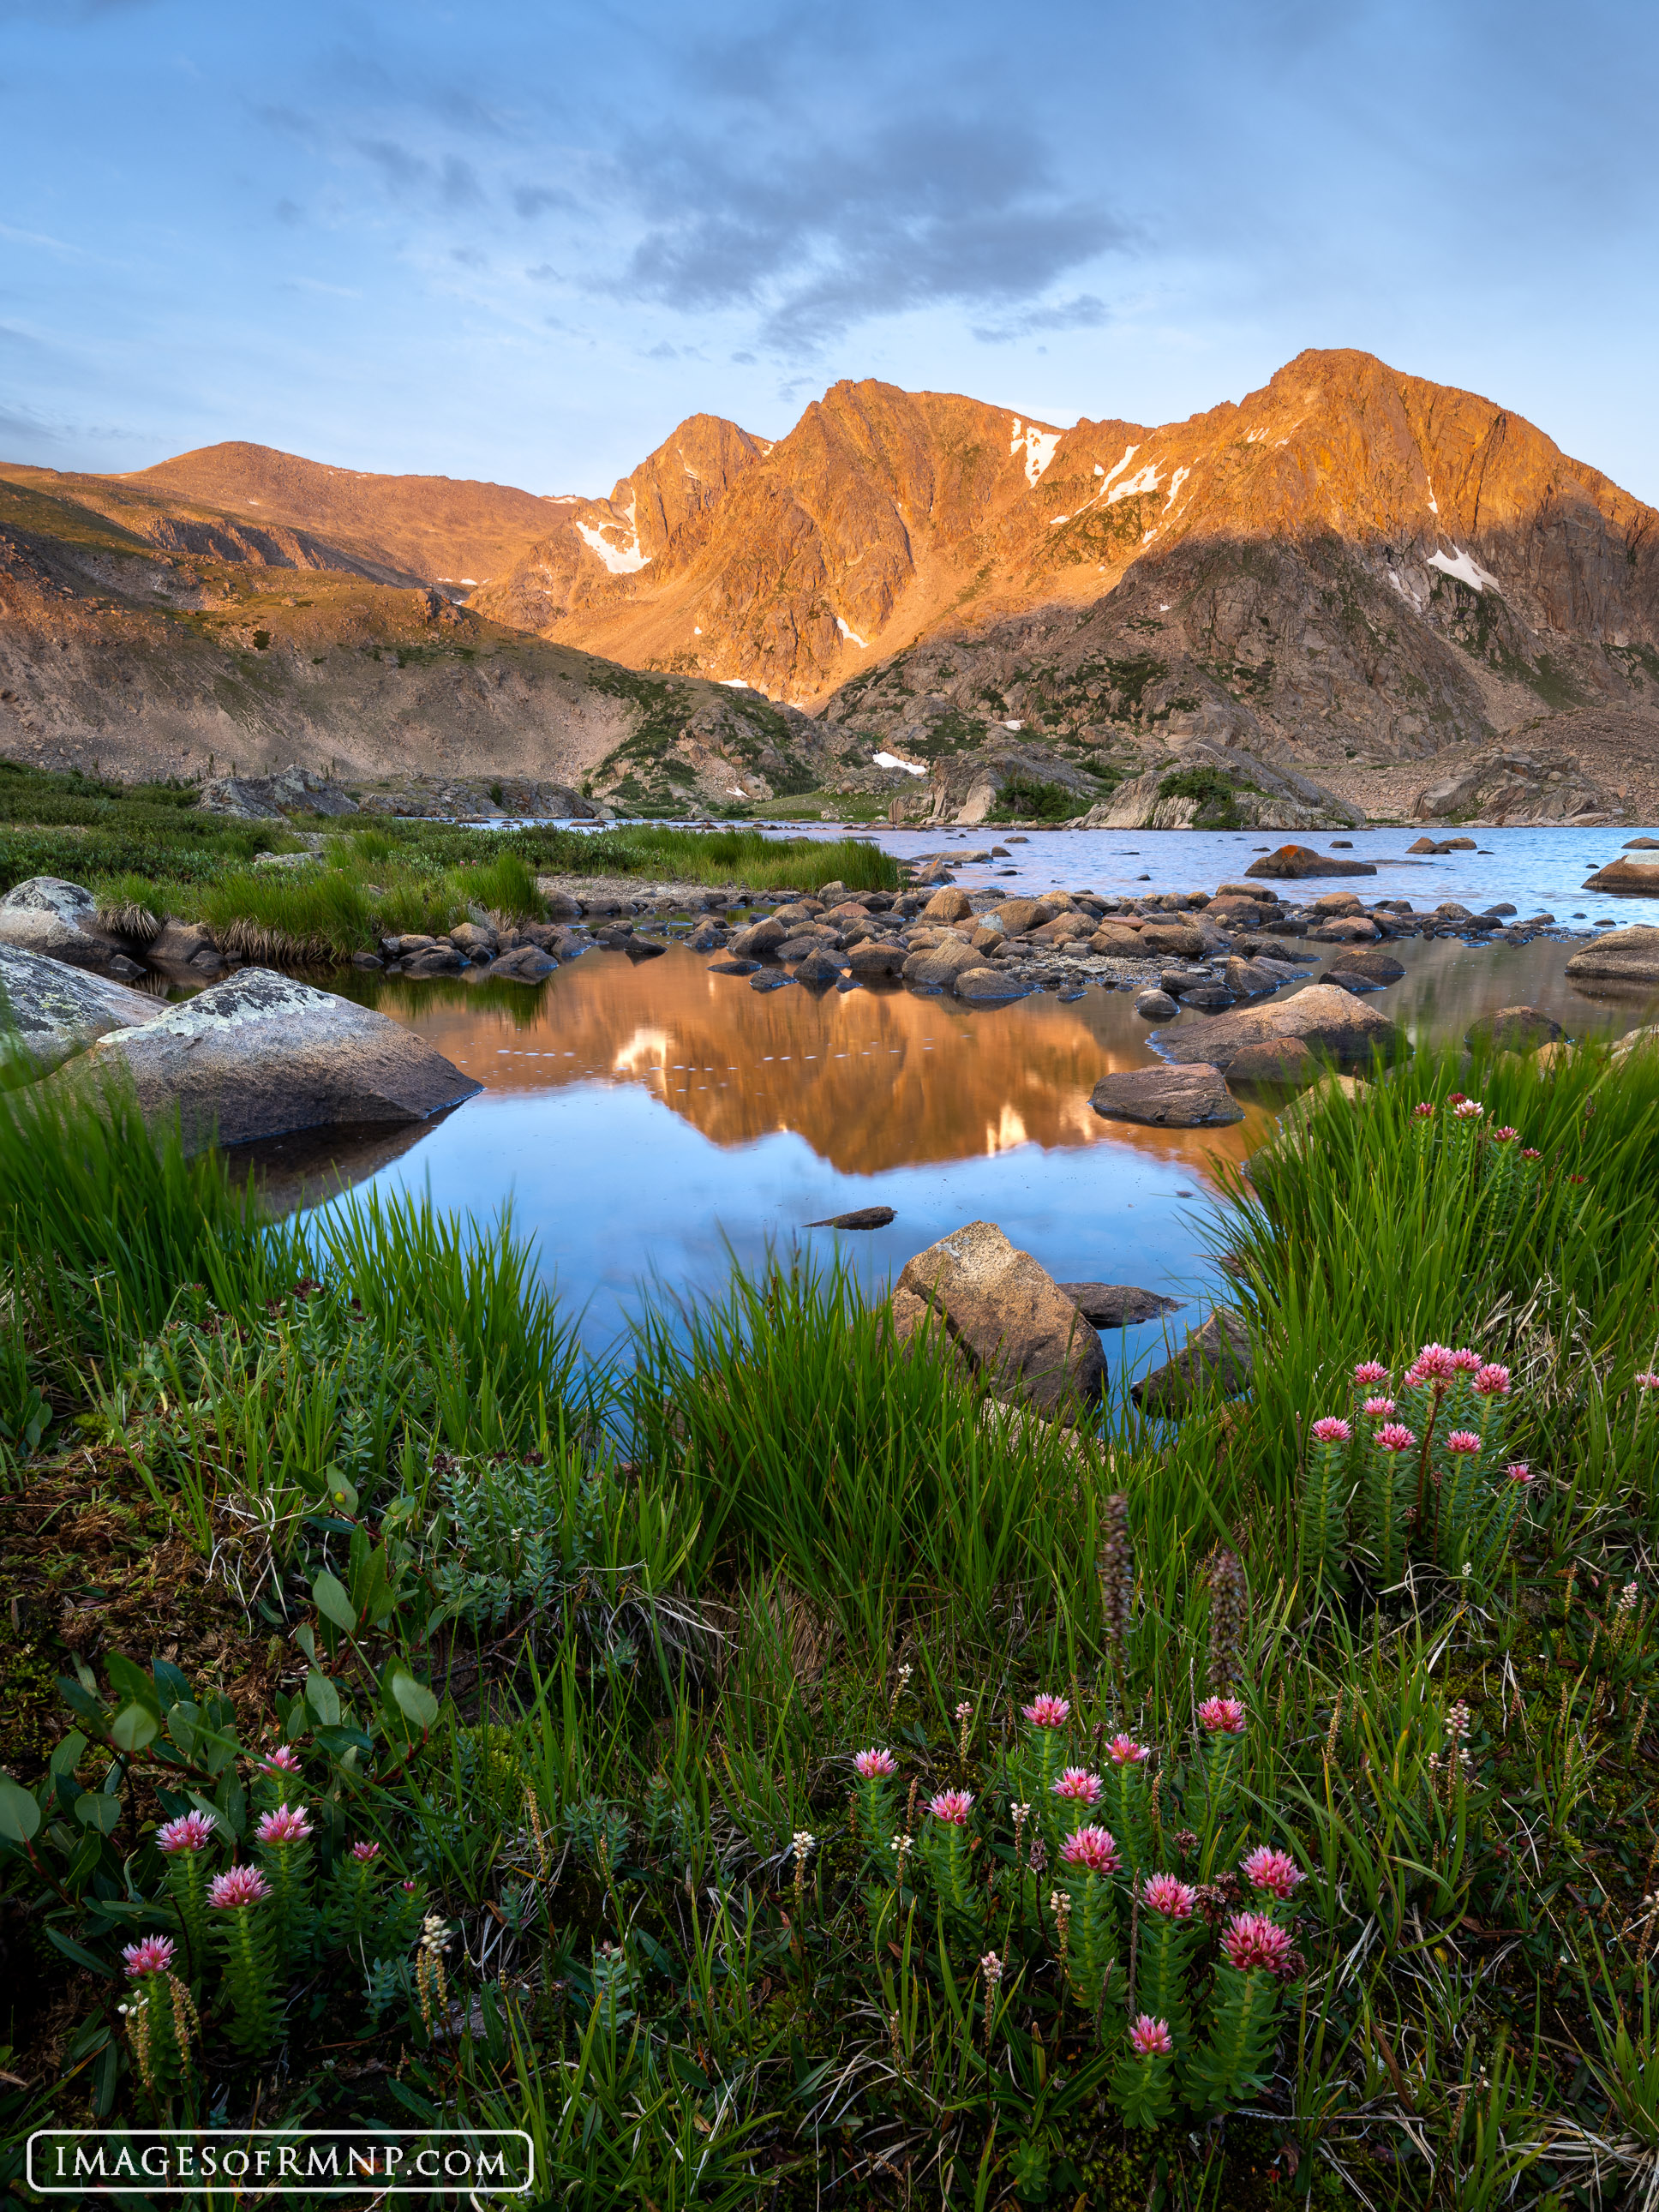 For 14 years I've been visiting this remote location in Rocky Mountain National Park trying to capture a photo which would do...